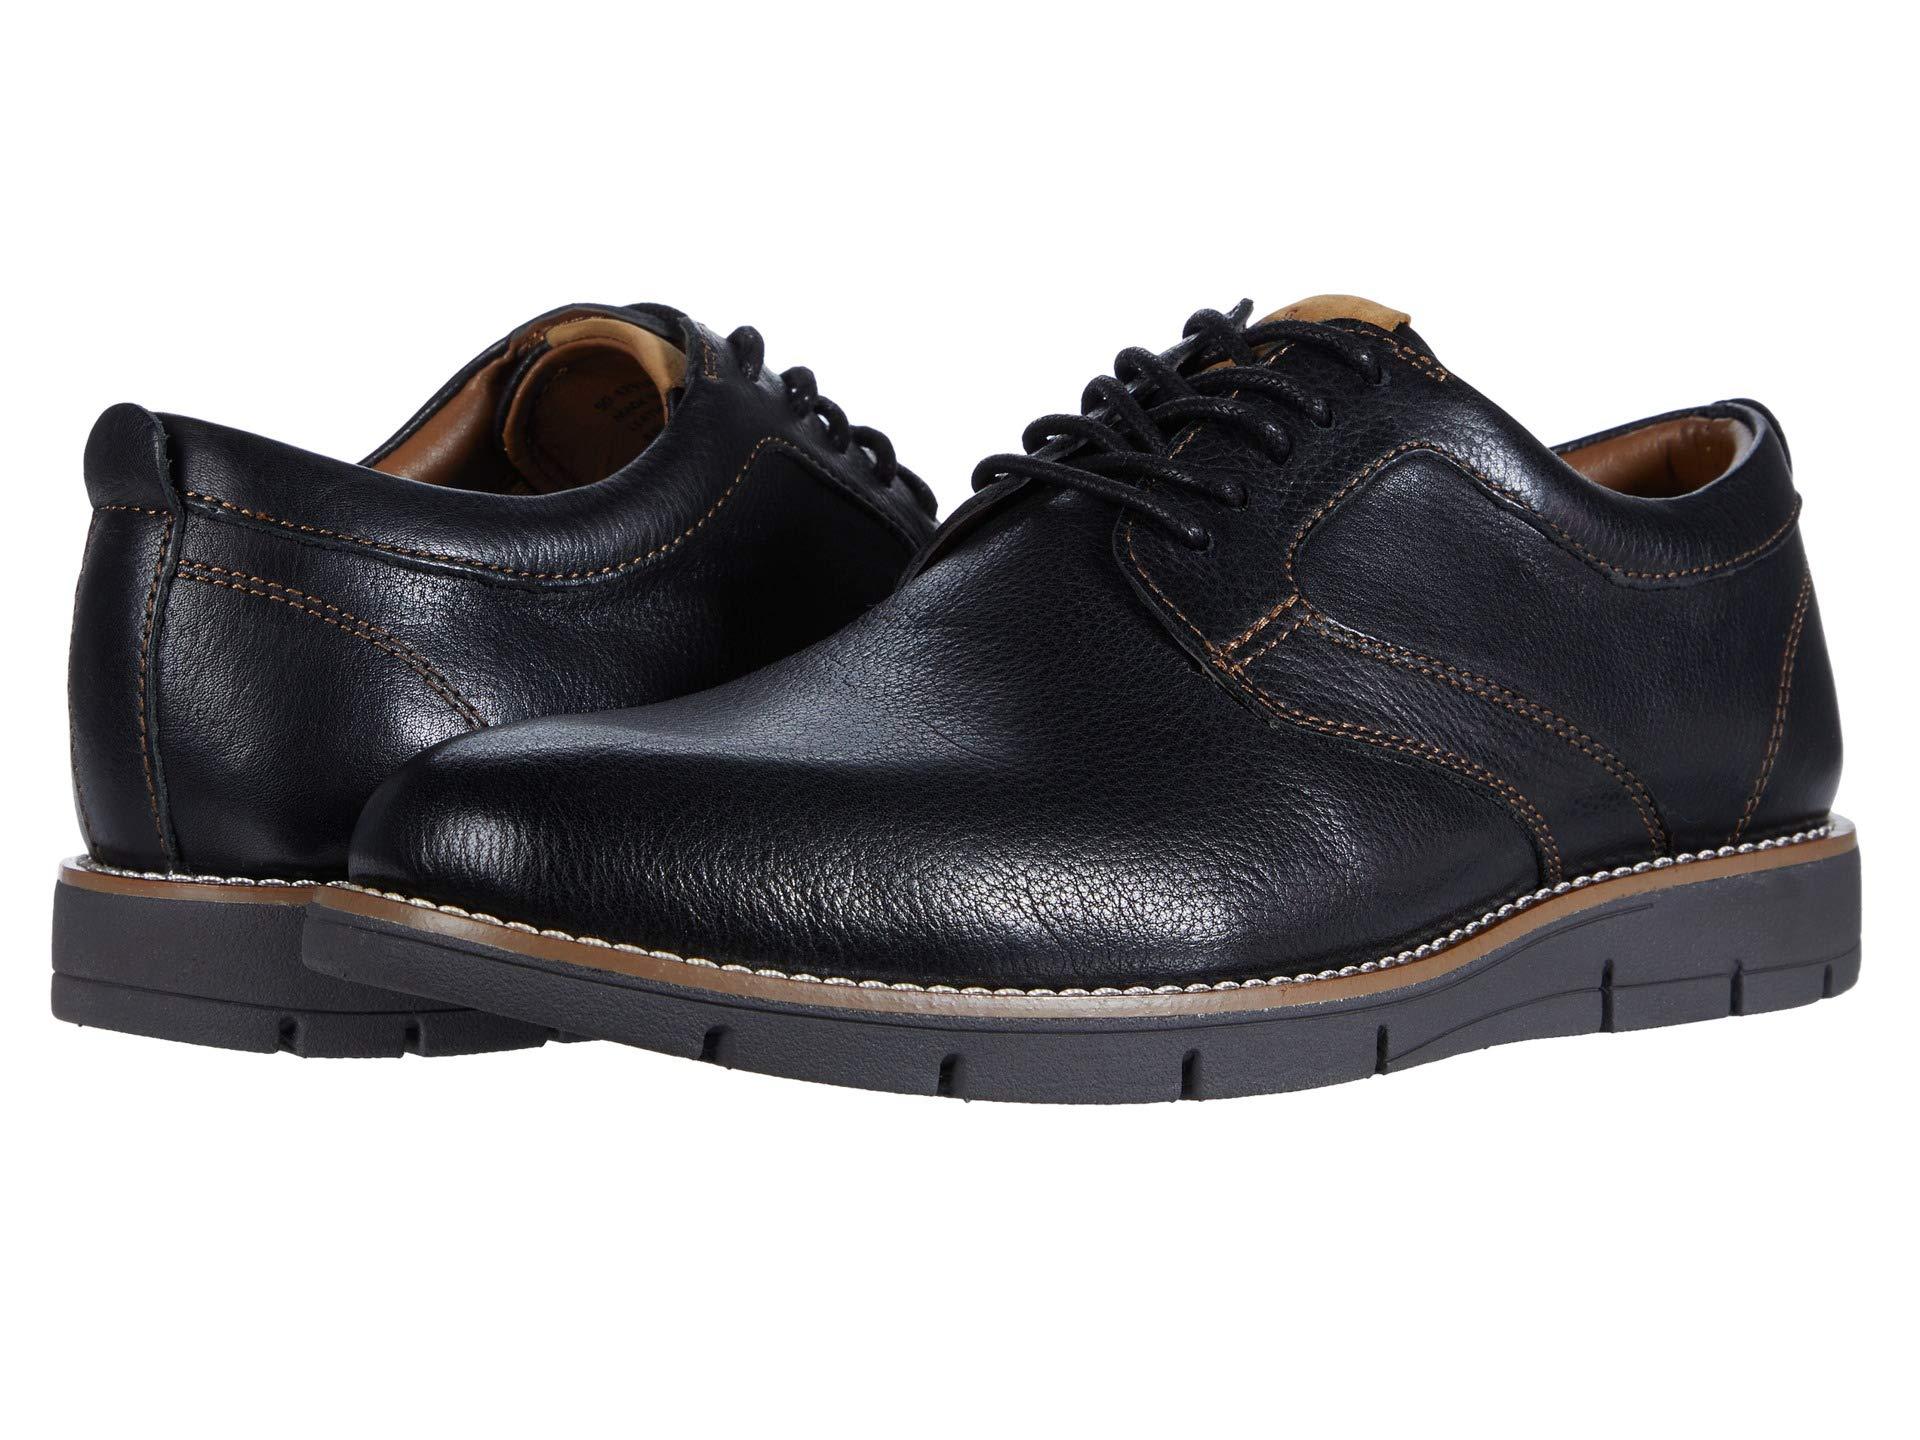 Dockers Synthetic Nathan in Black for Men - Lyst